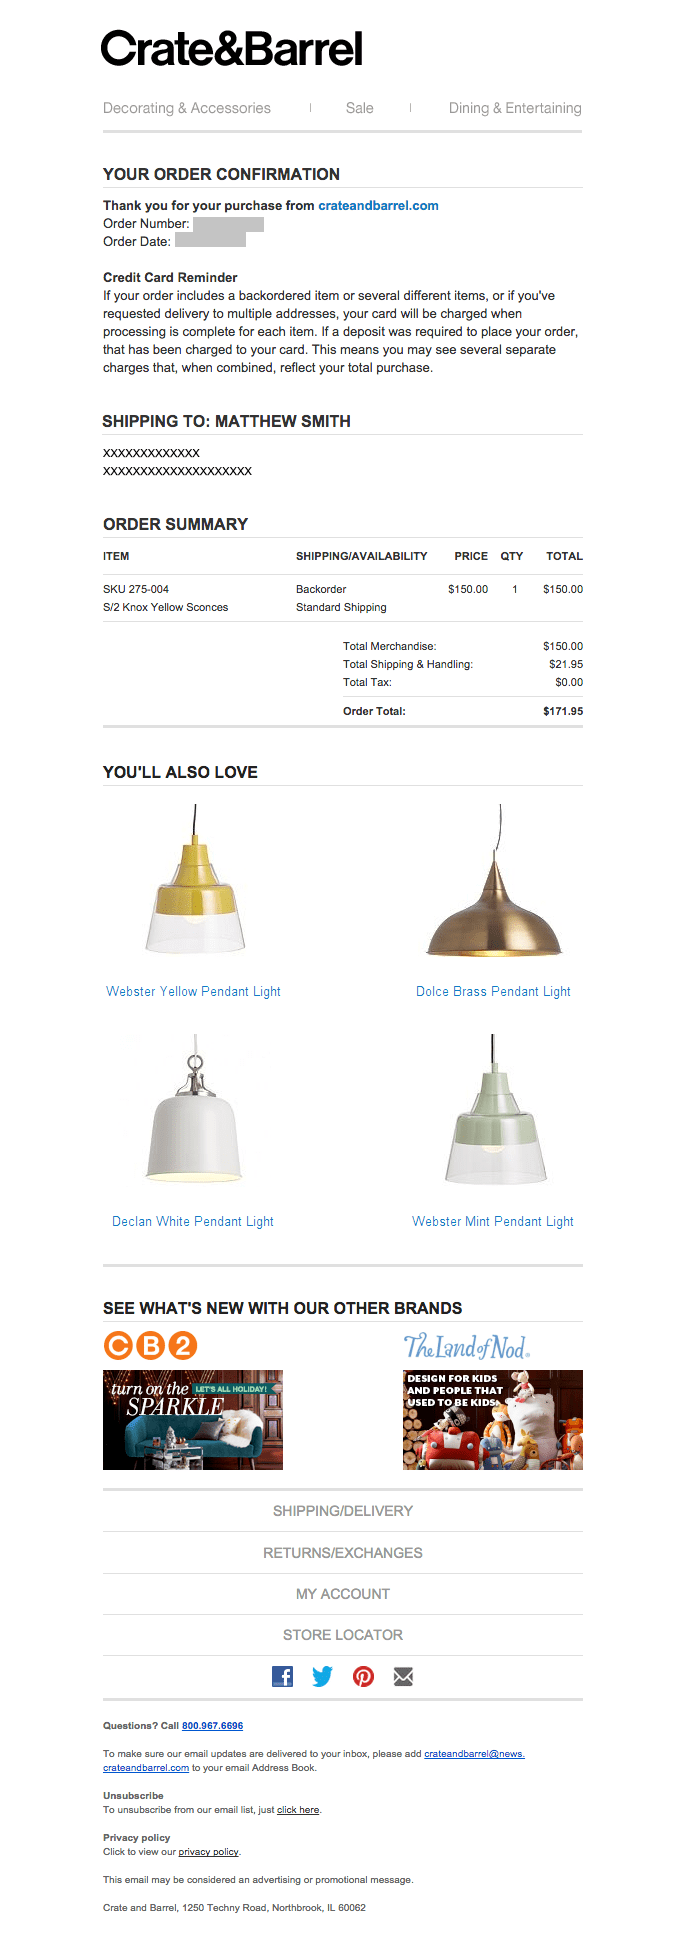 Crate & Barrel Order Confirmation Industry Email Template screenshot